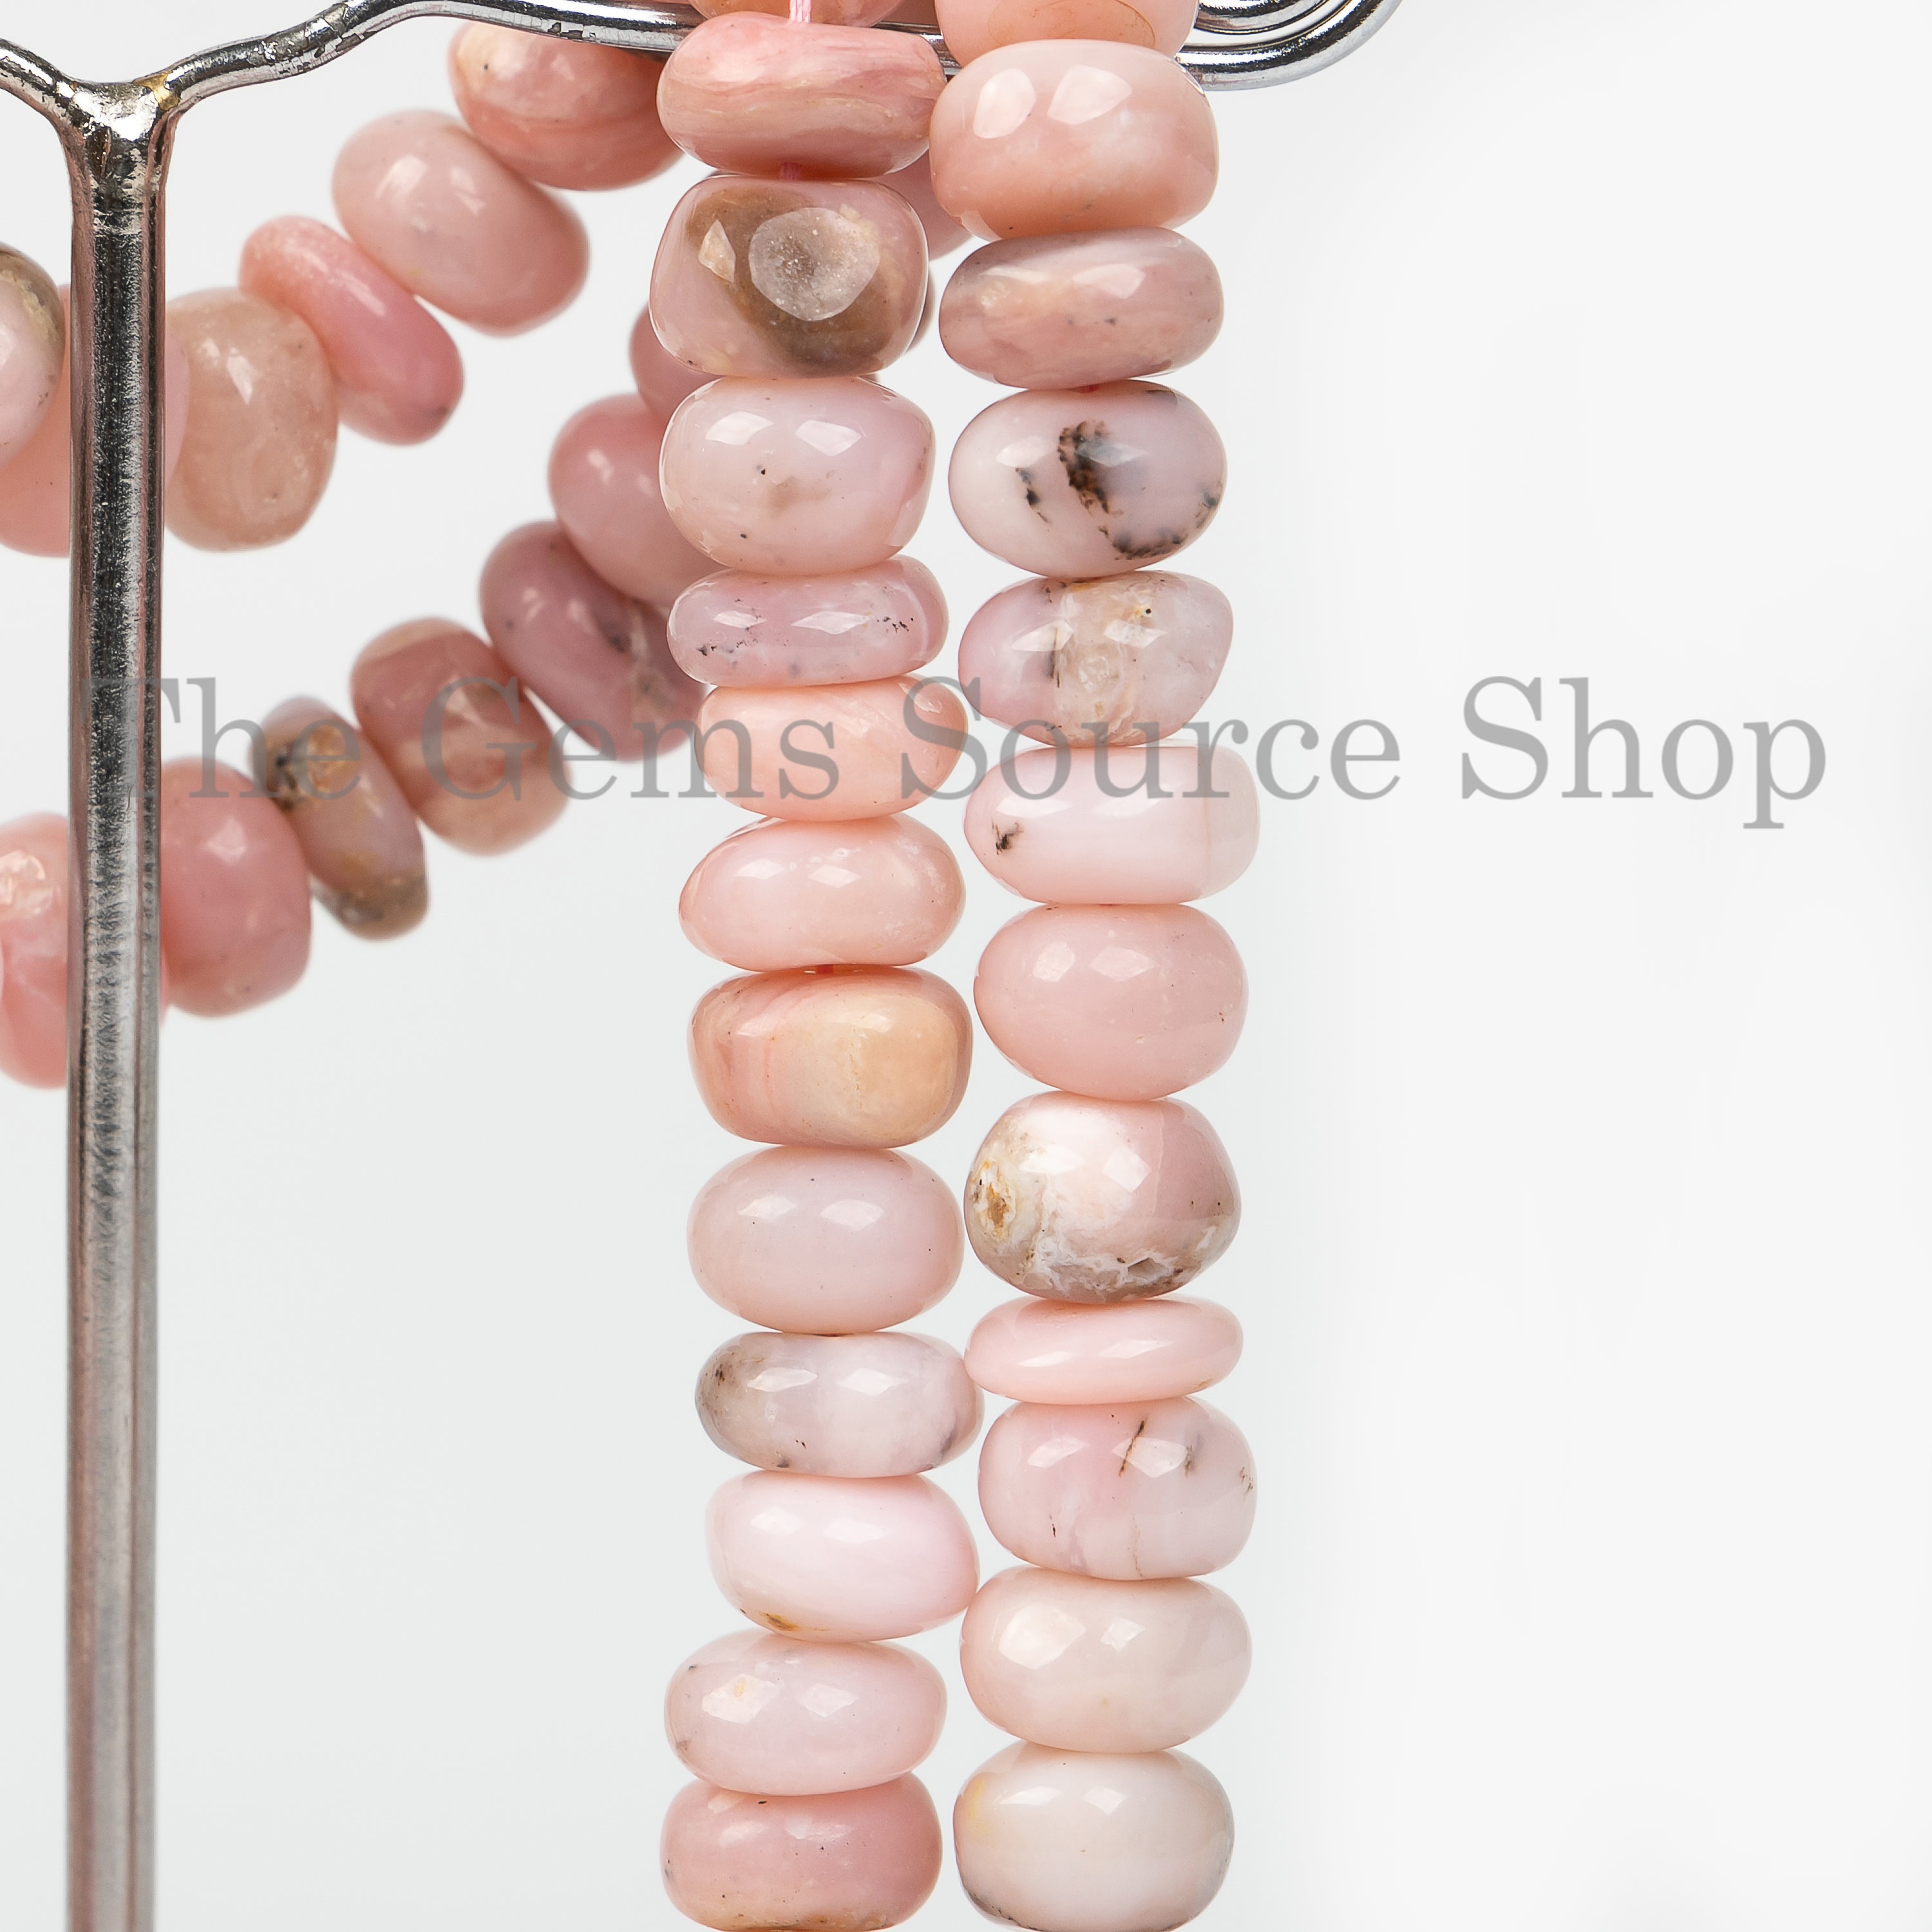 Pink Opal Beads, Pink Opal Rondelle Beads, Pink Opal Smooth Beads, Pink Opal Gemstone Beads